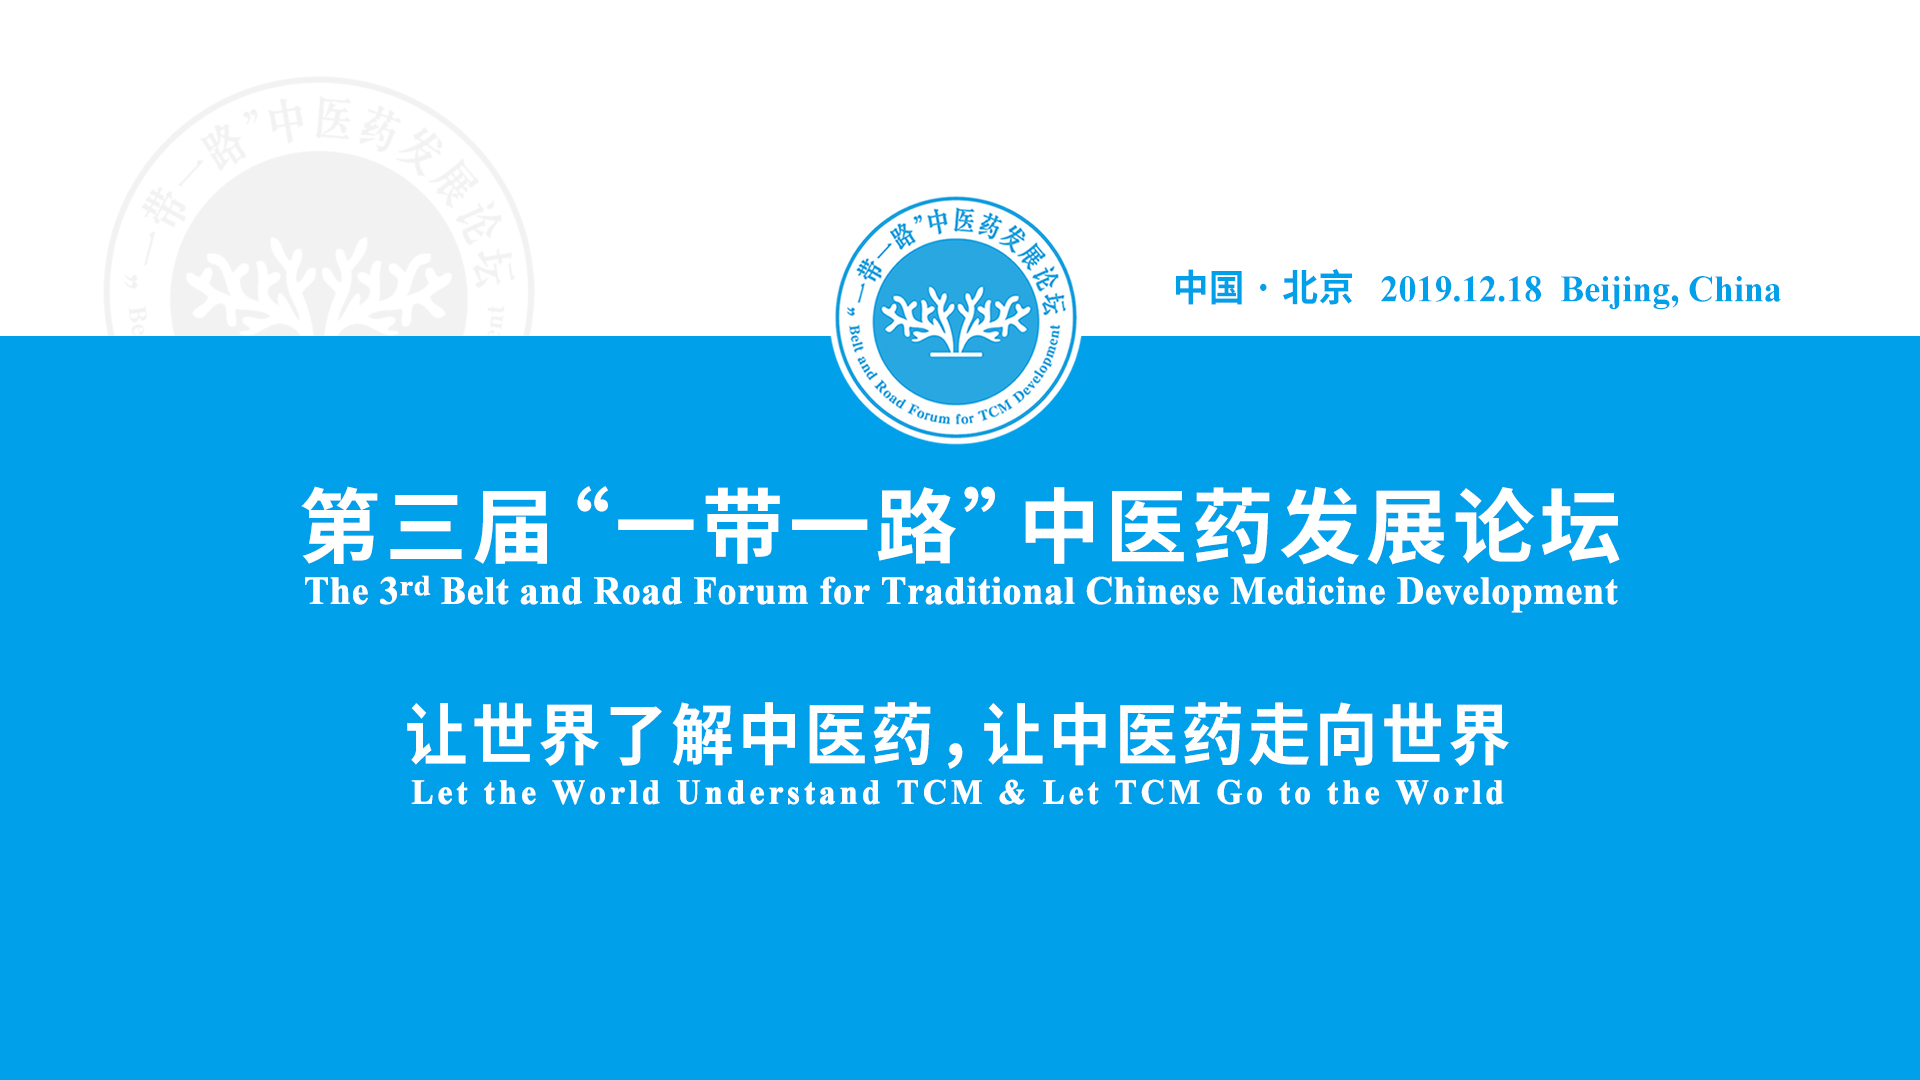 The 4th Belt and Road Forum for TCM Development